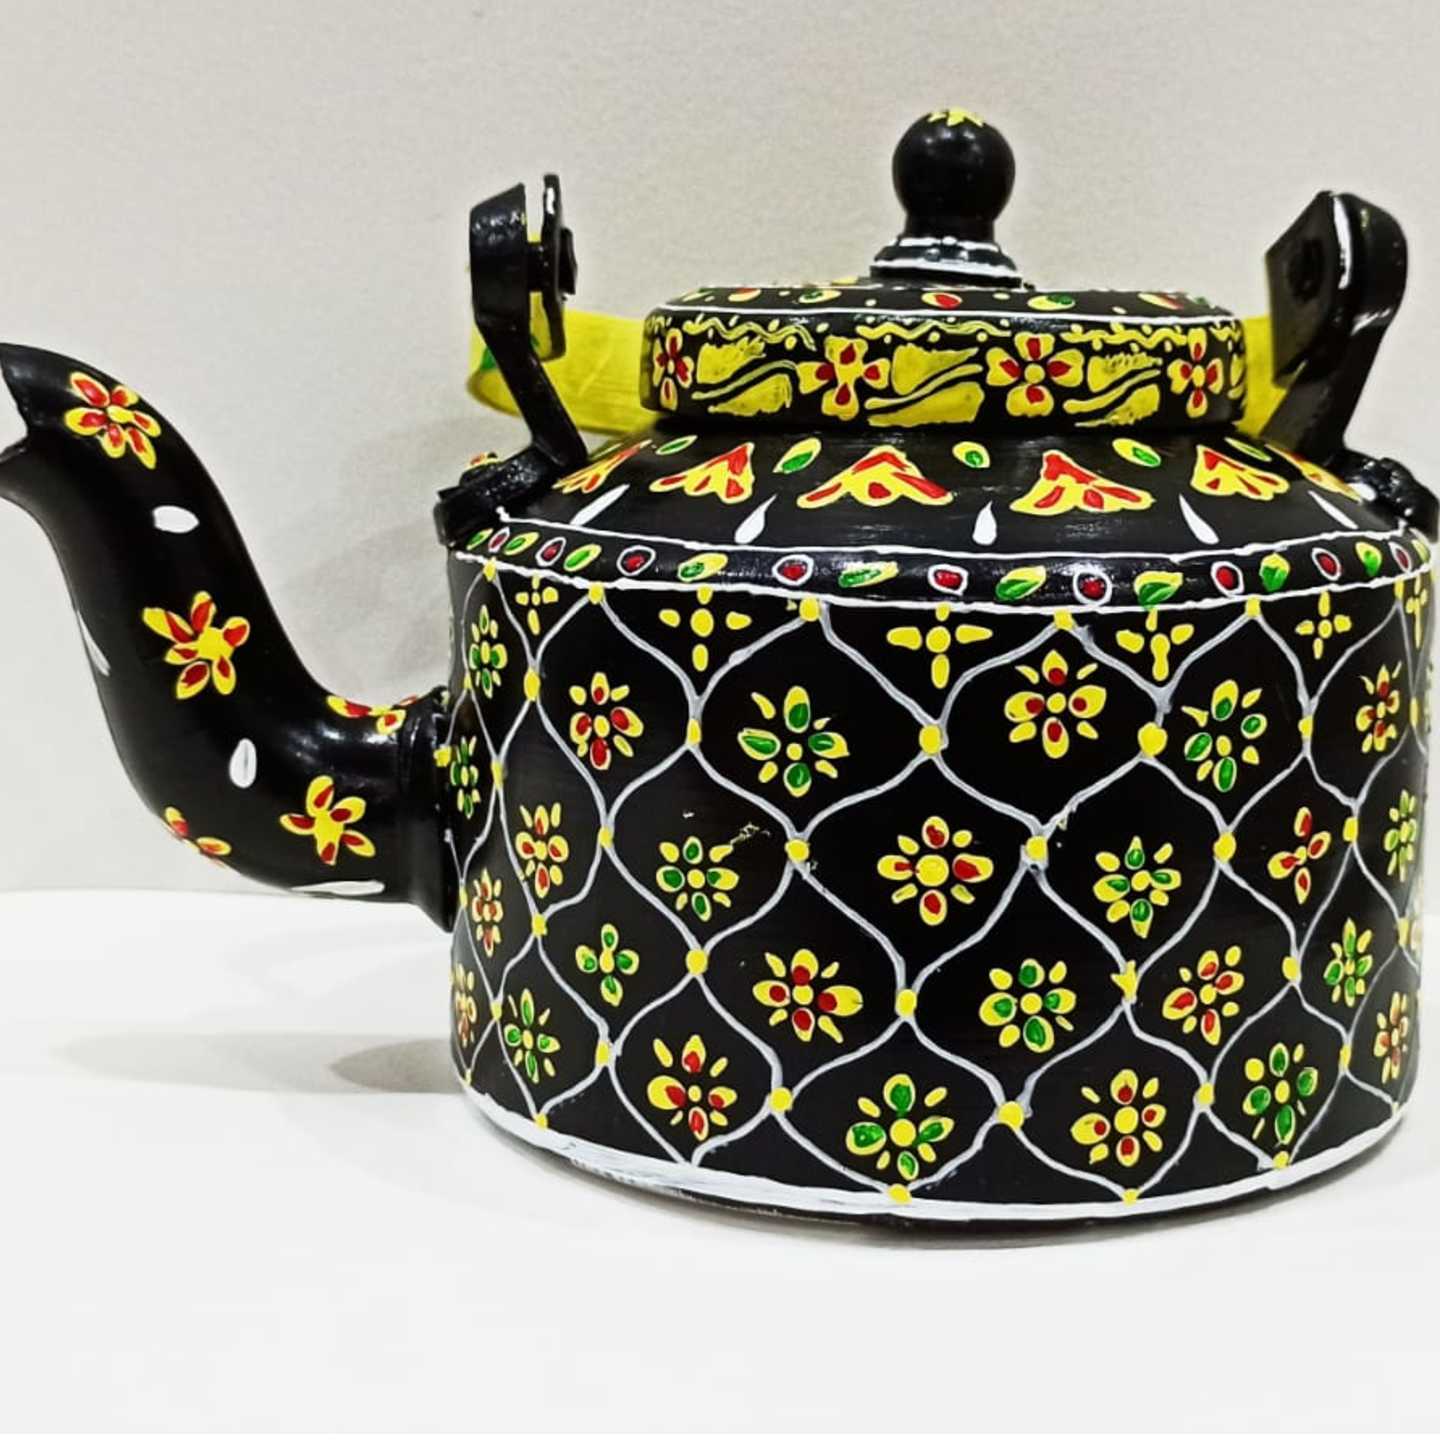 Hand painted Kettle (Black)